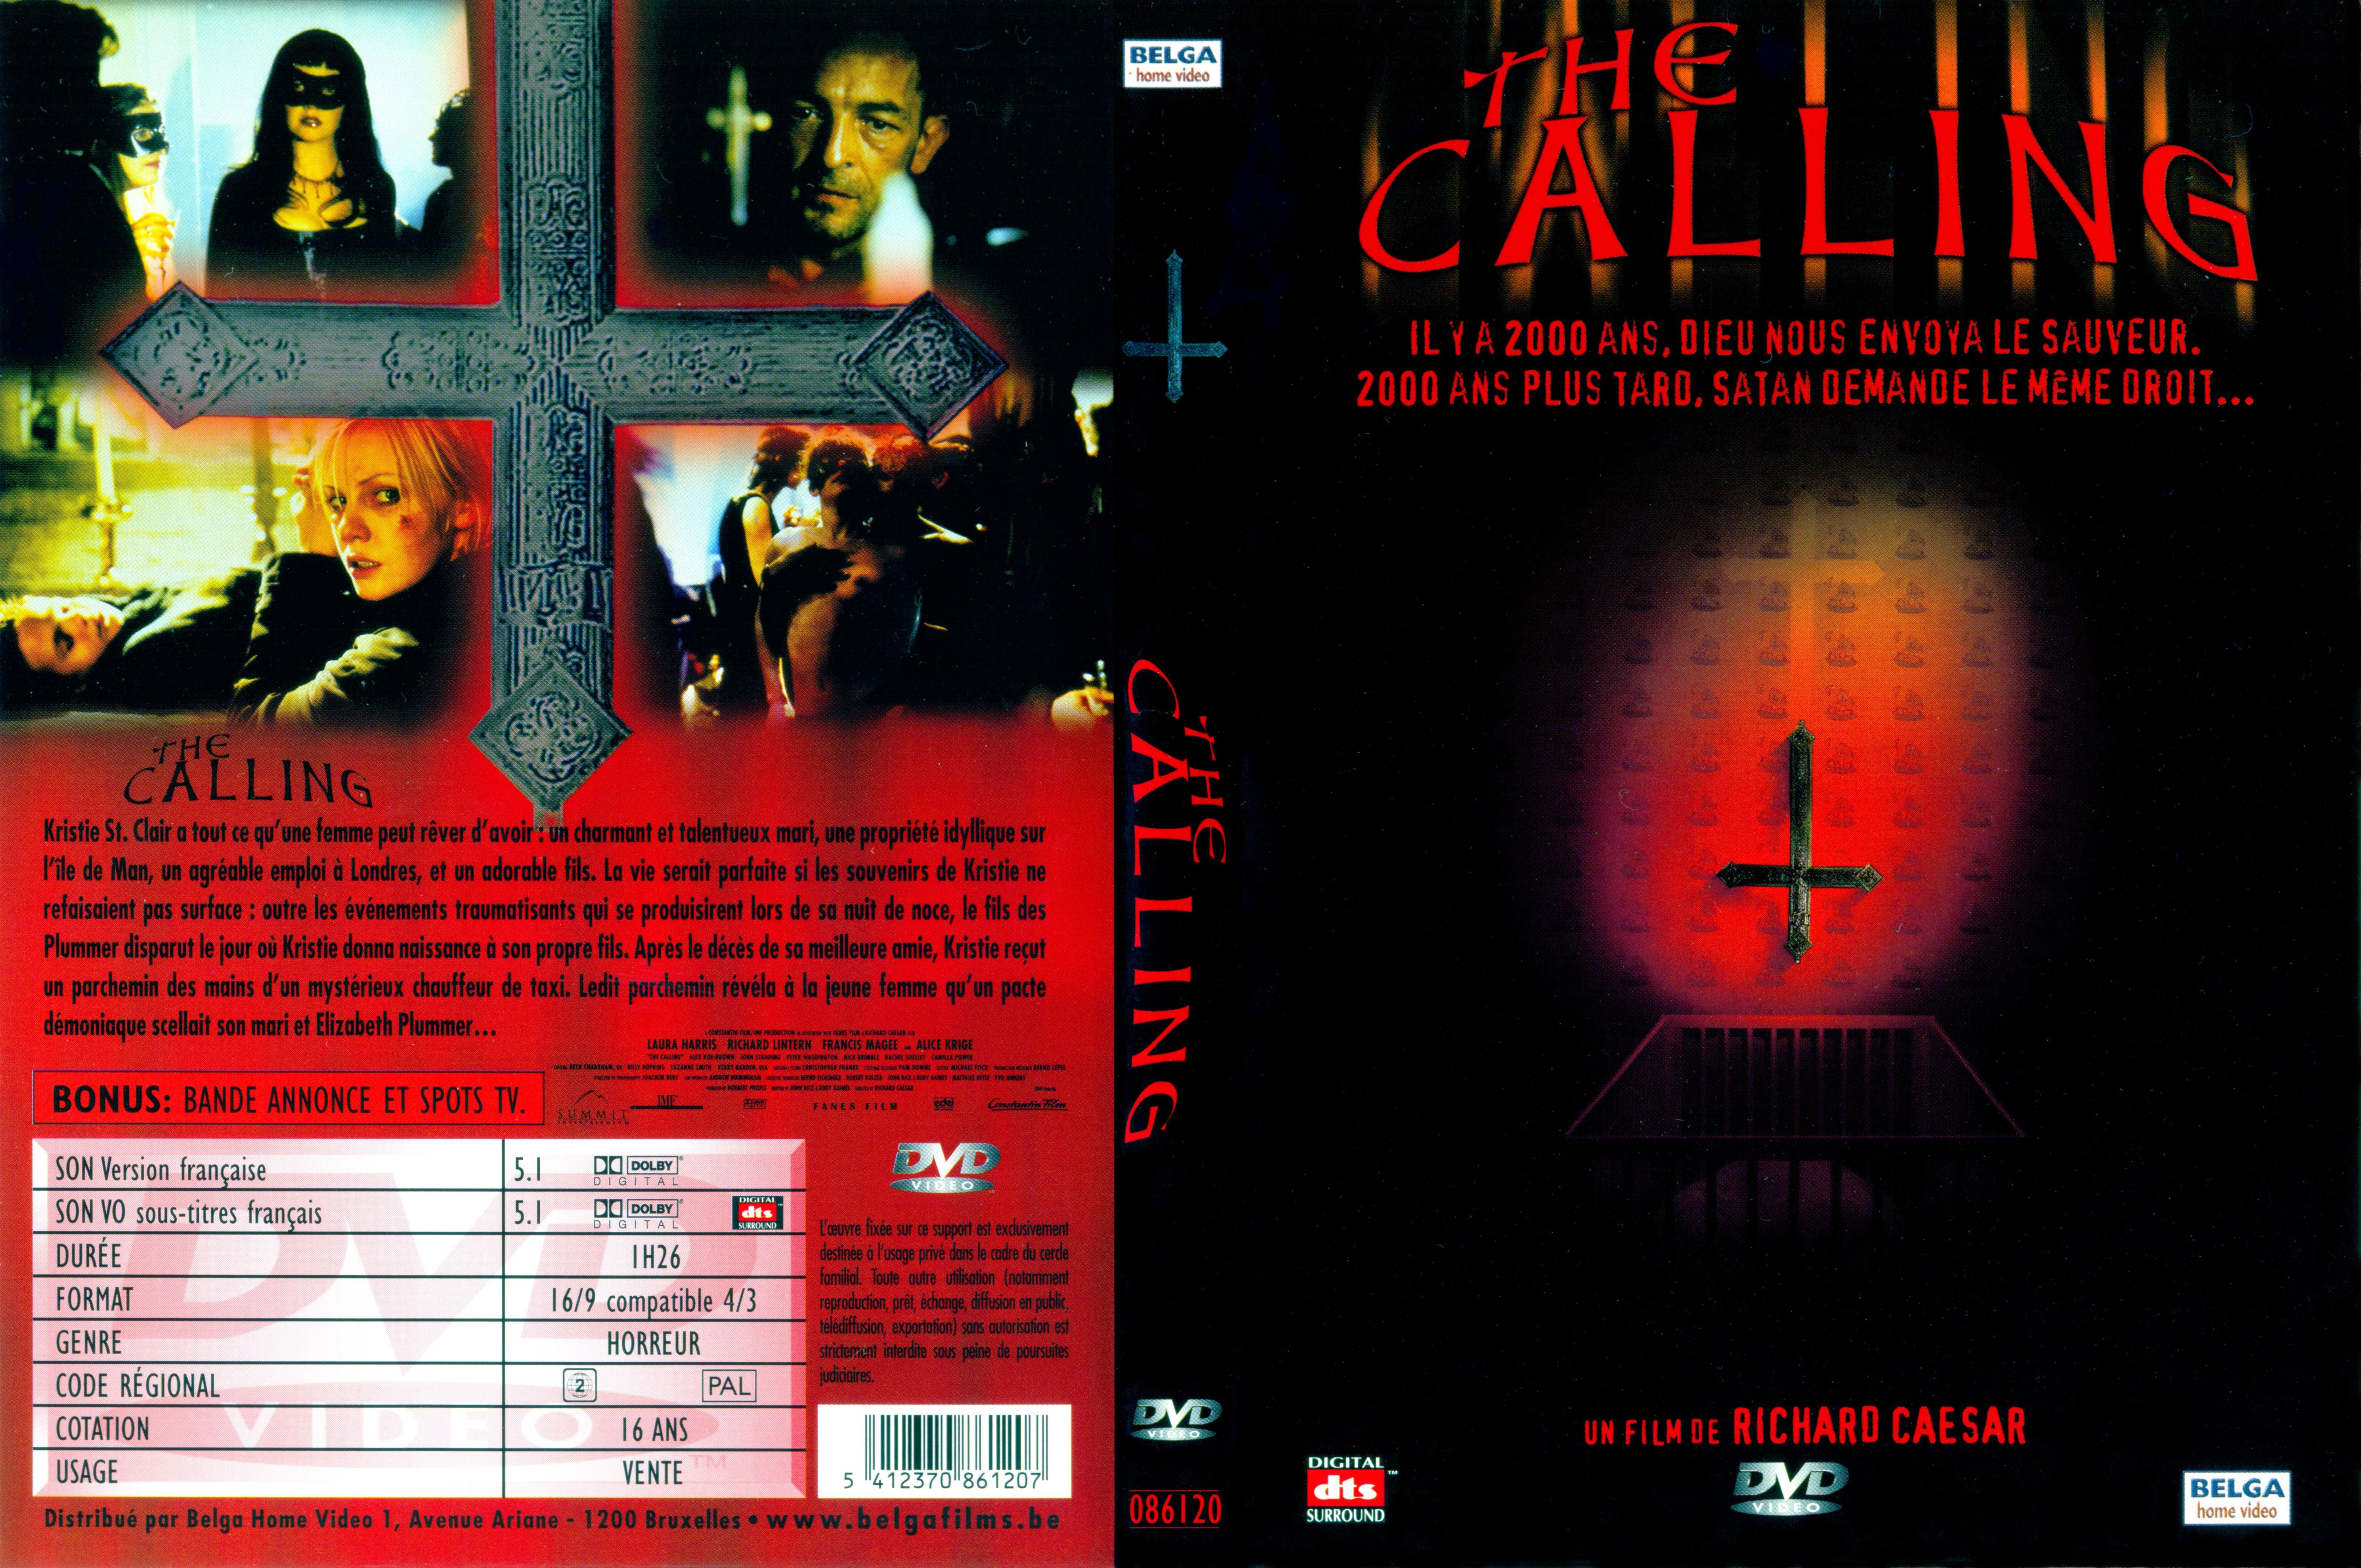 Jaquette DVD The calling